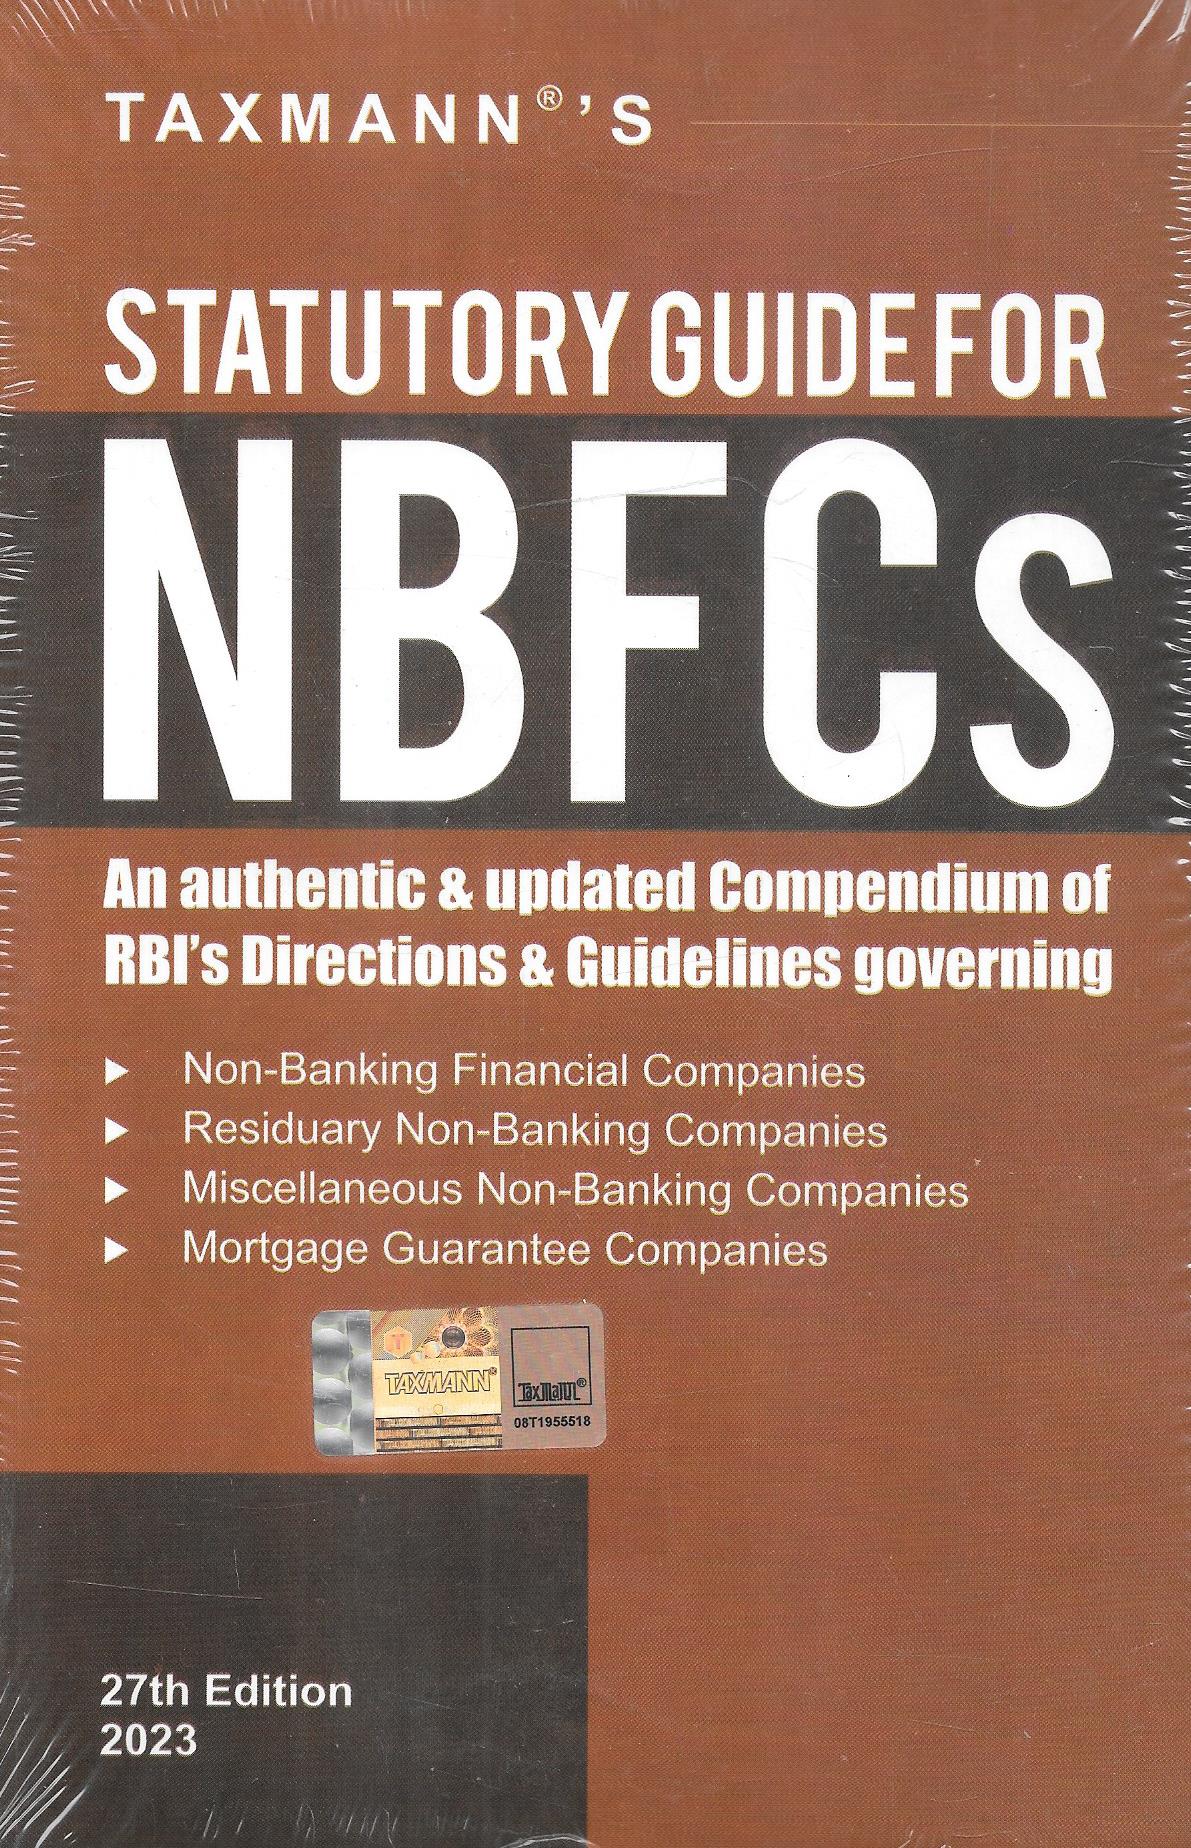 Statutory Guide for NBFCs